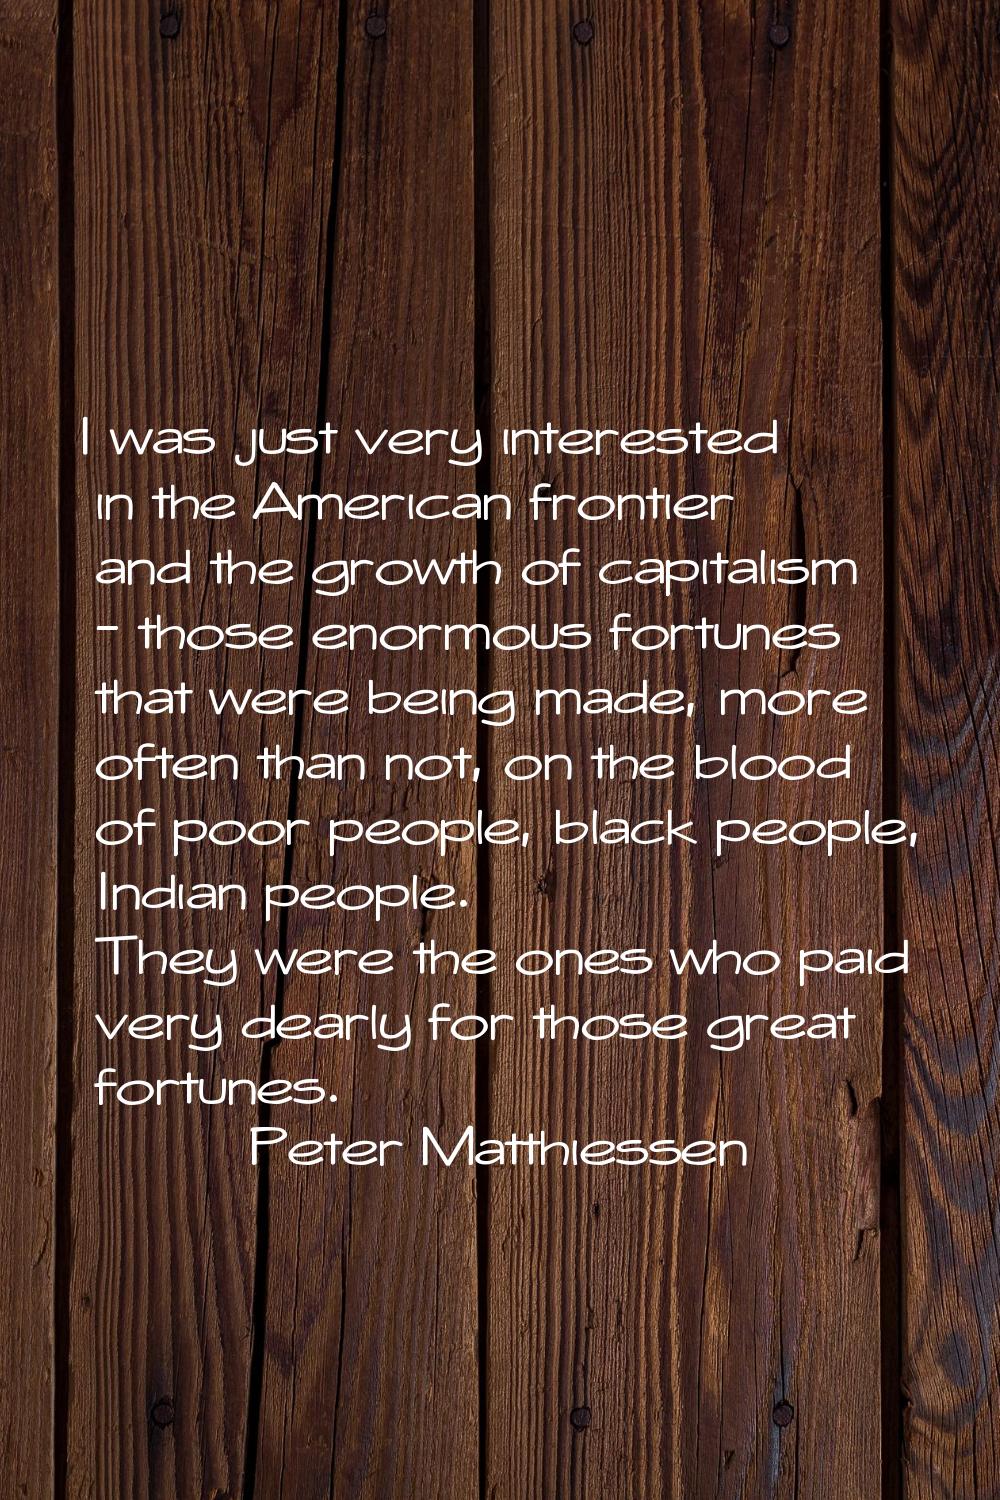 I was just very interested in the American frontier and the growth of capitalism - those enormous f